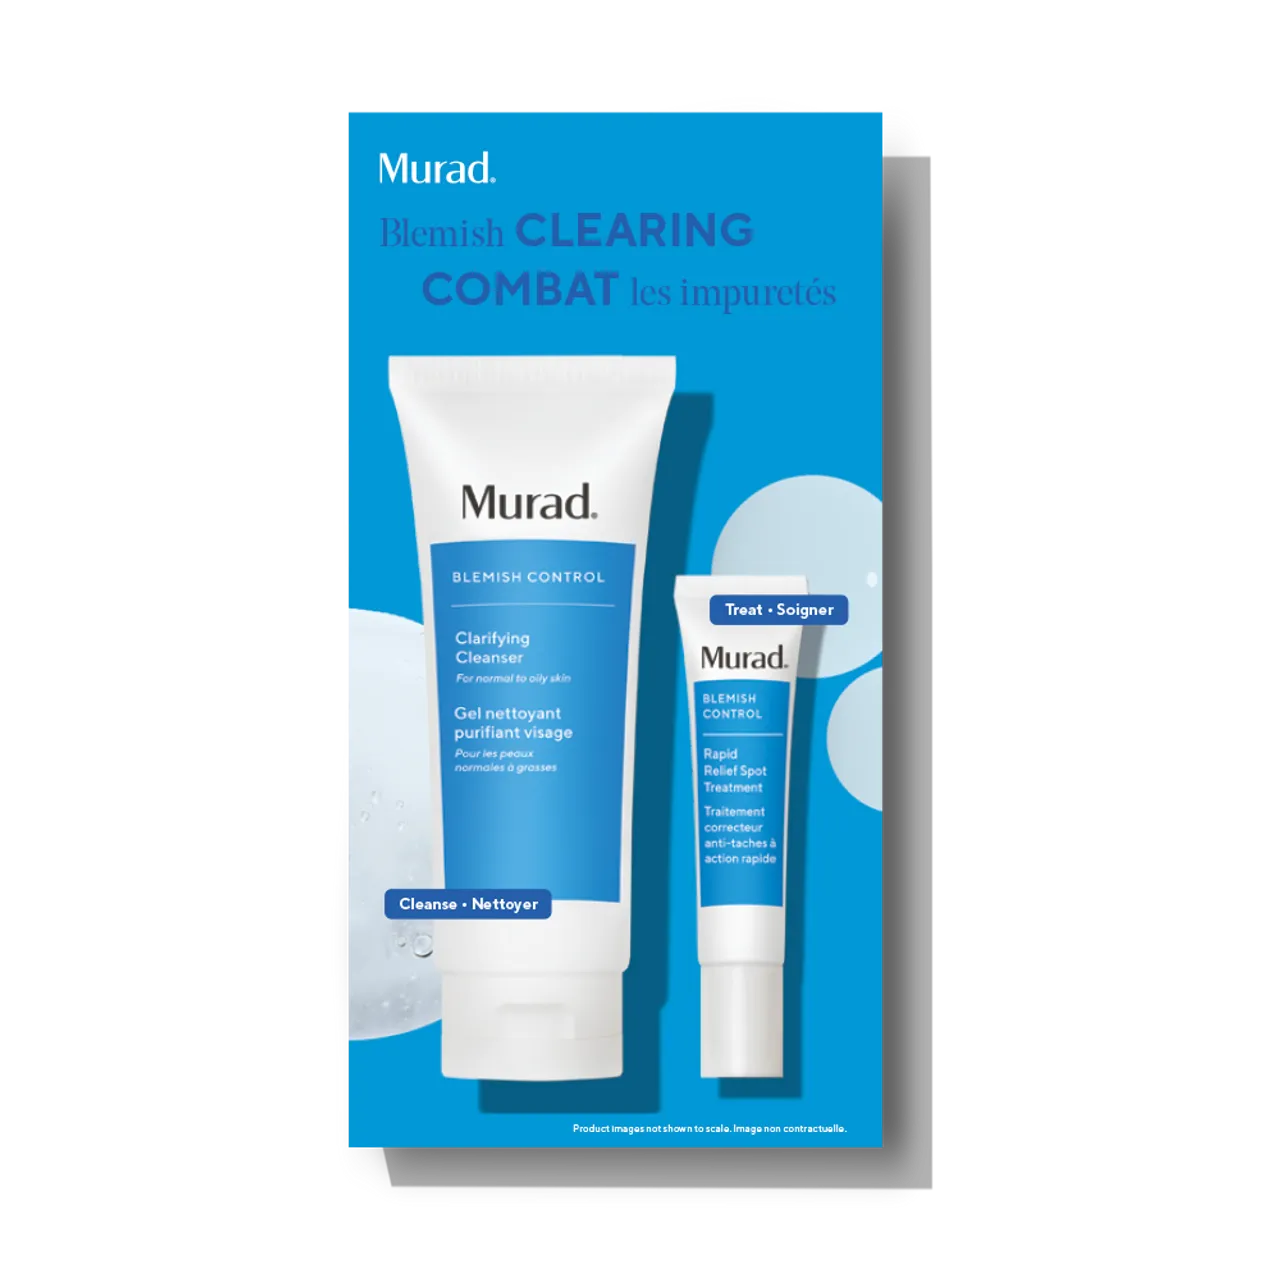 A tied FEMMENORDIC's choice in the Clinique vs Murad comparison, Murad’s Blemish Clearing Value Set